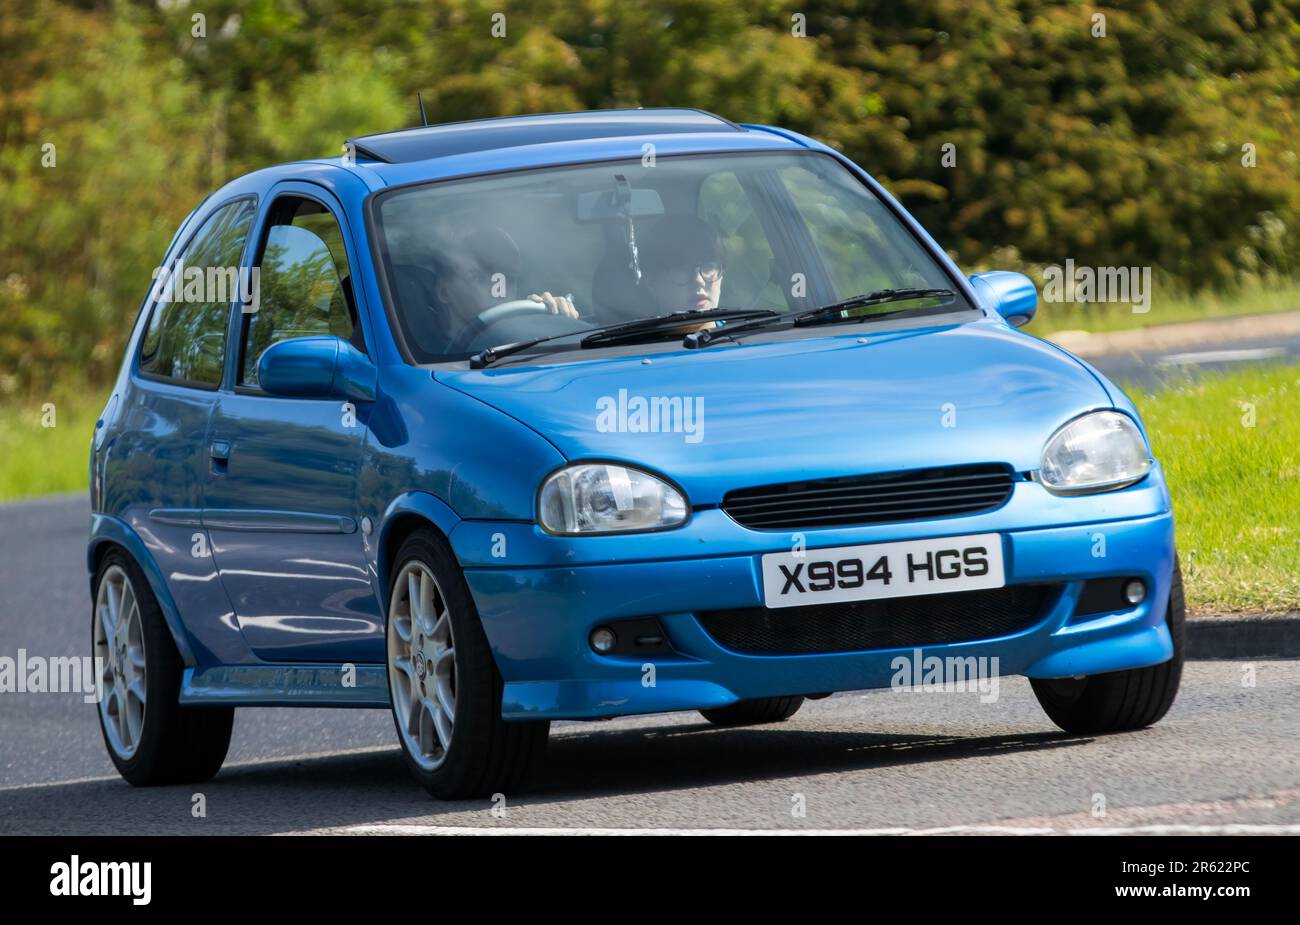 Stony Stratford,UK - June 4th 2023: 2000,blue VAUXHALL CORSA  classic car travelling on an English country road. Stock Photo